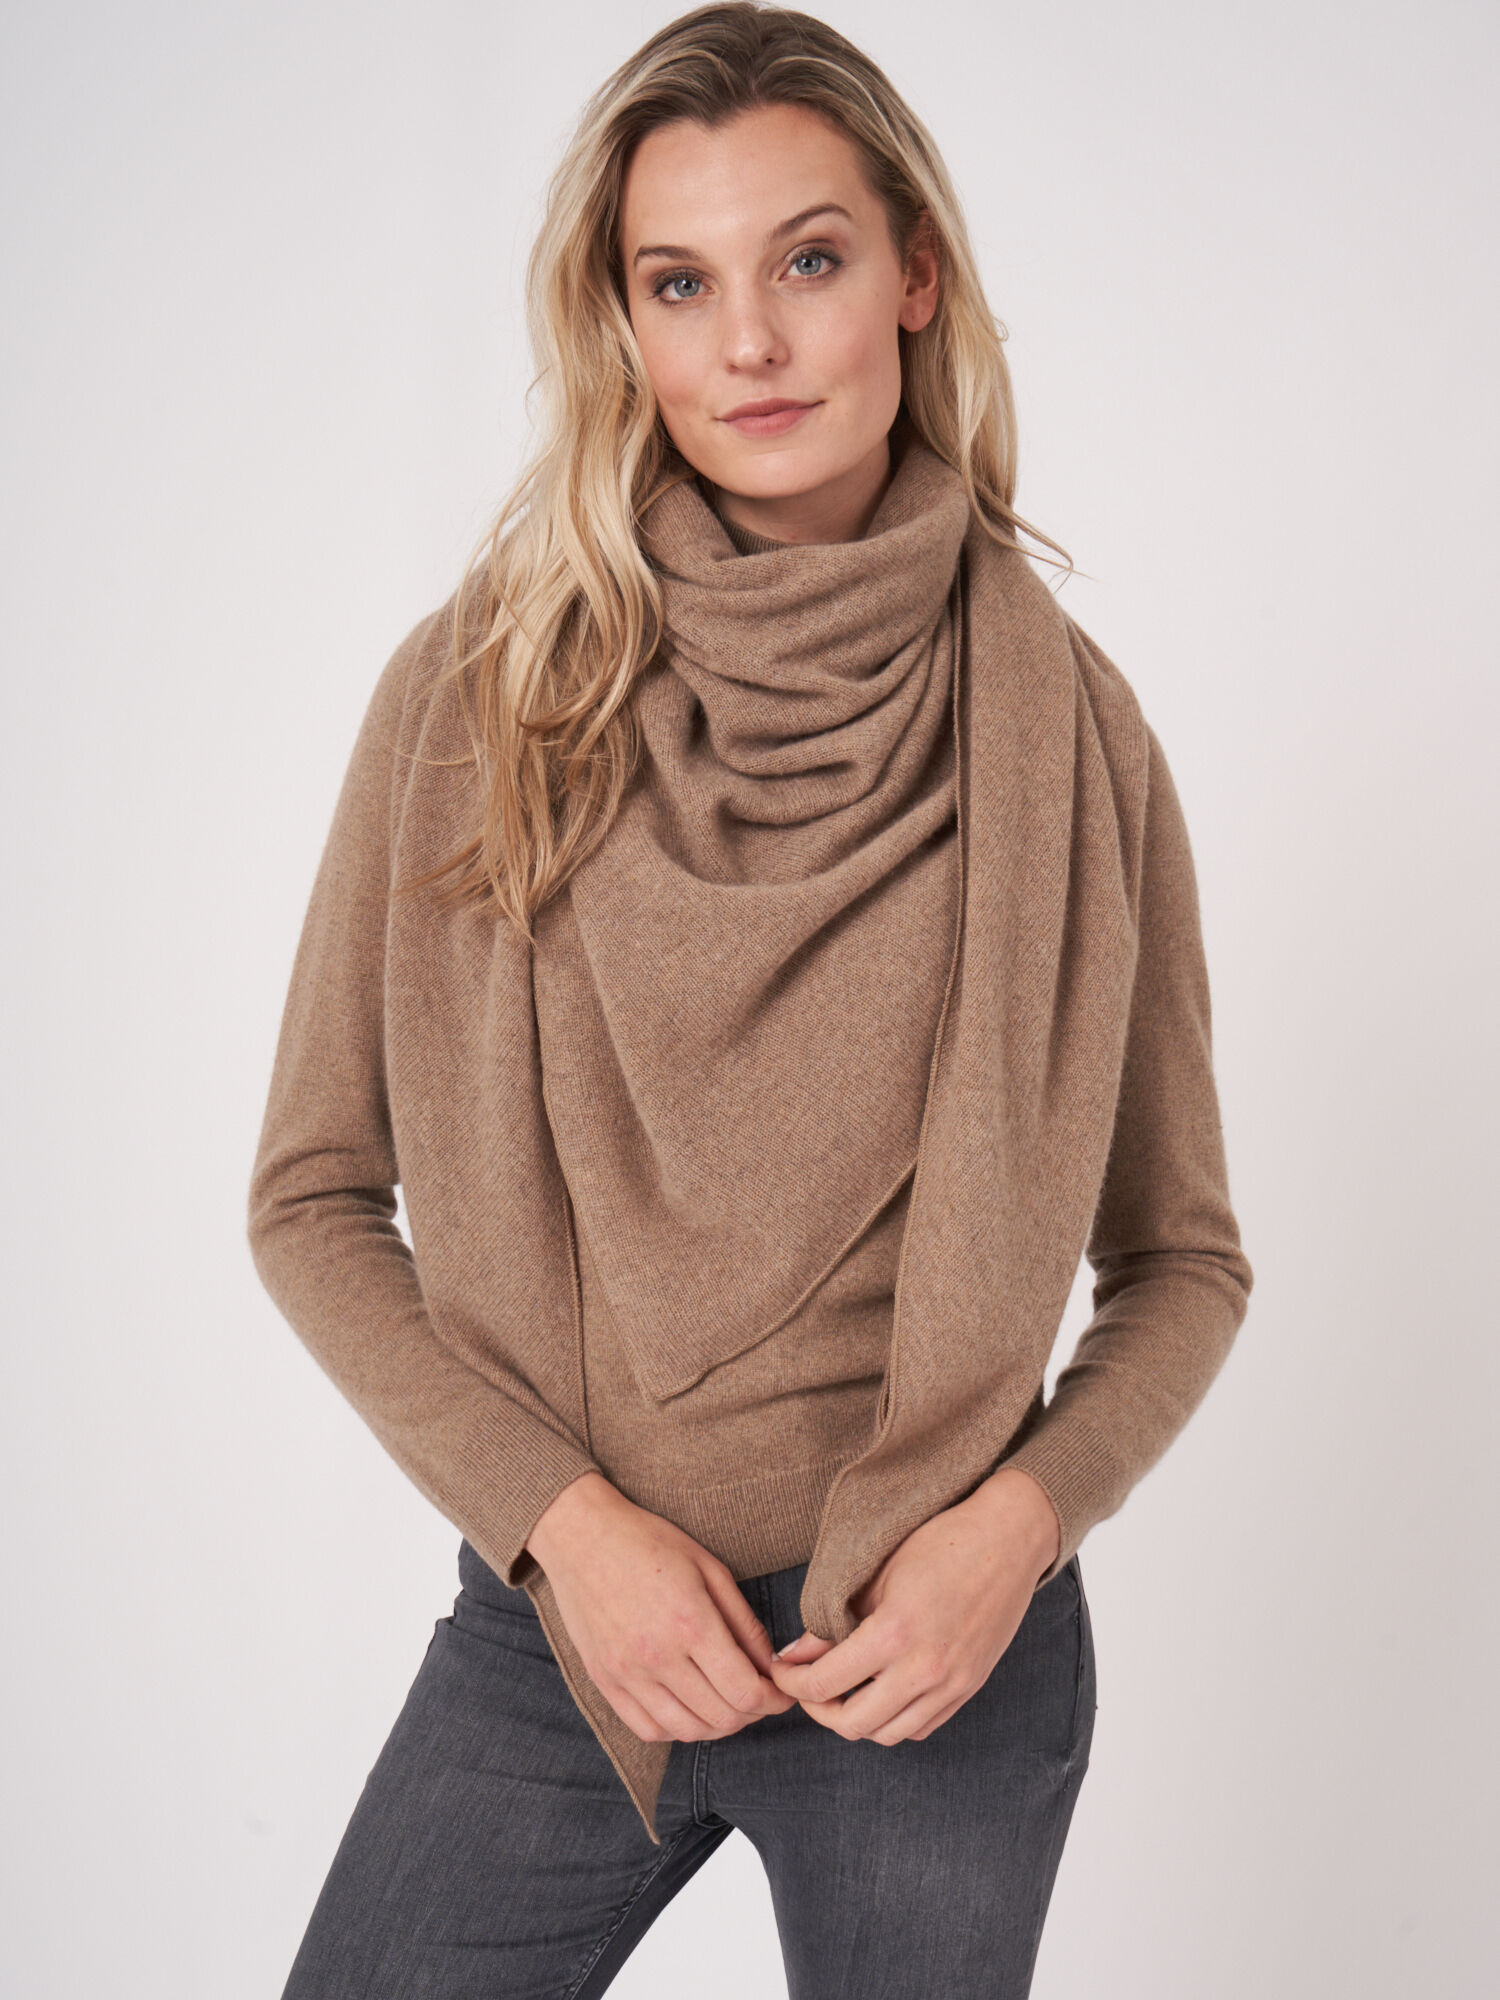 Scarf – repeat-cashmere – The Perfect Provenance